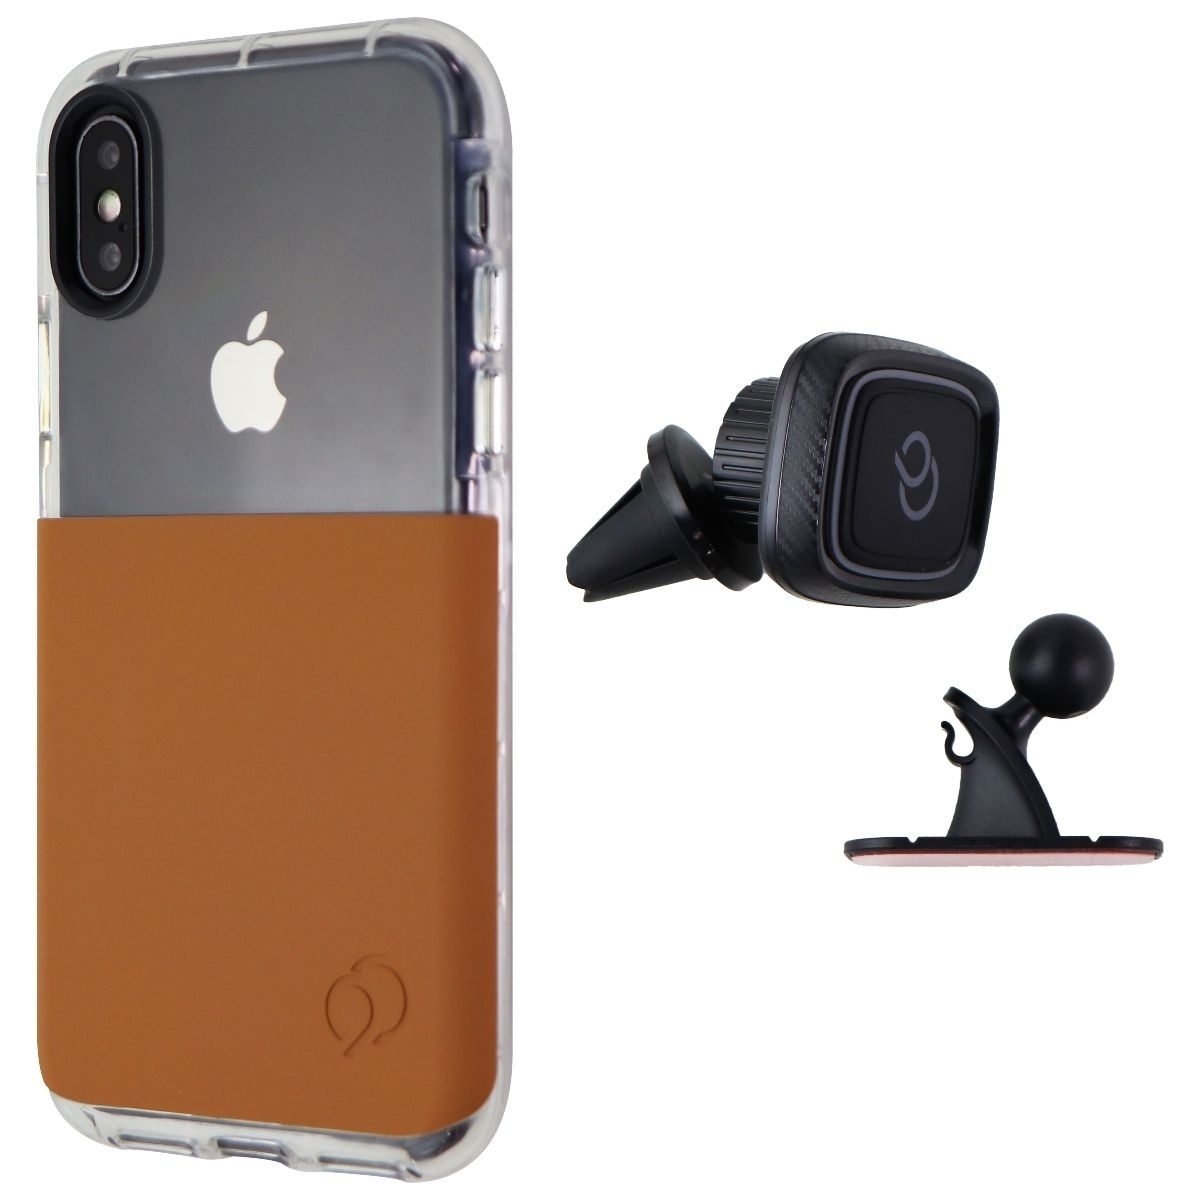 Nimbus9 Ghost 2 Series Case And Mount For Apple IPhone Xs / IPhone X - Nude